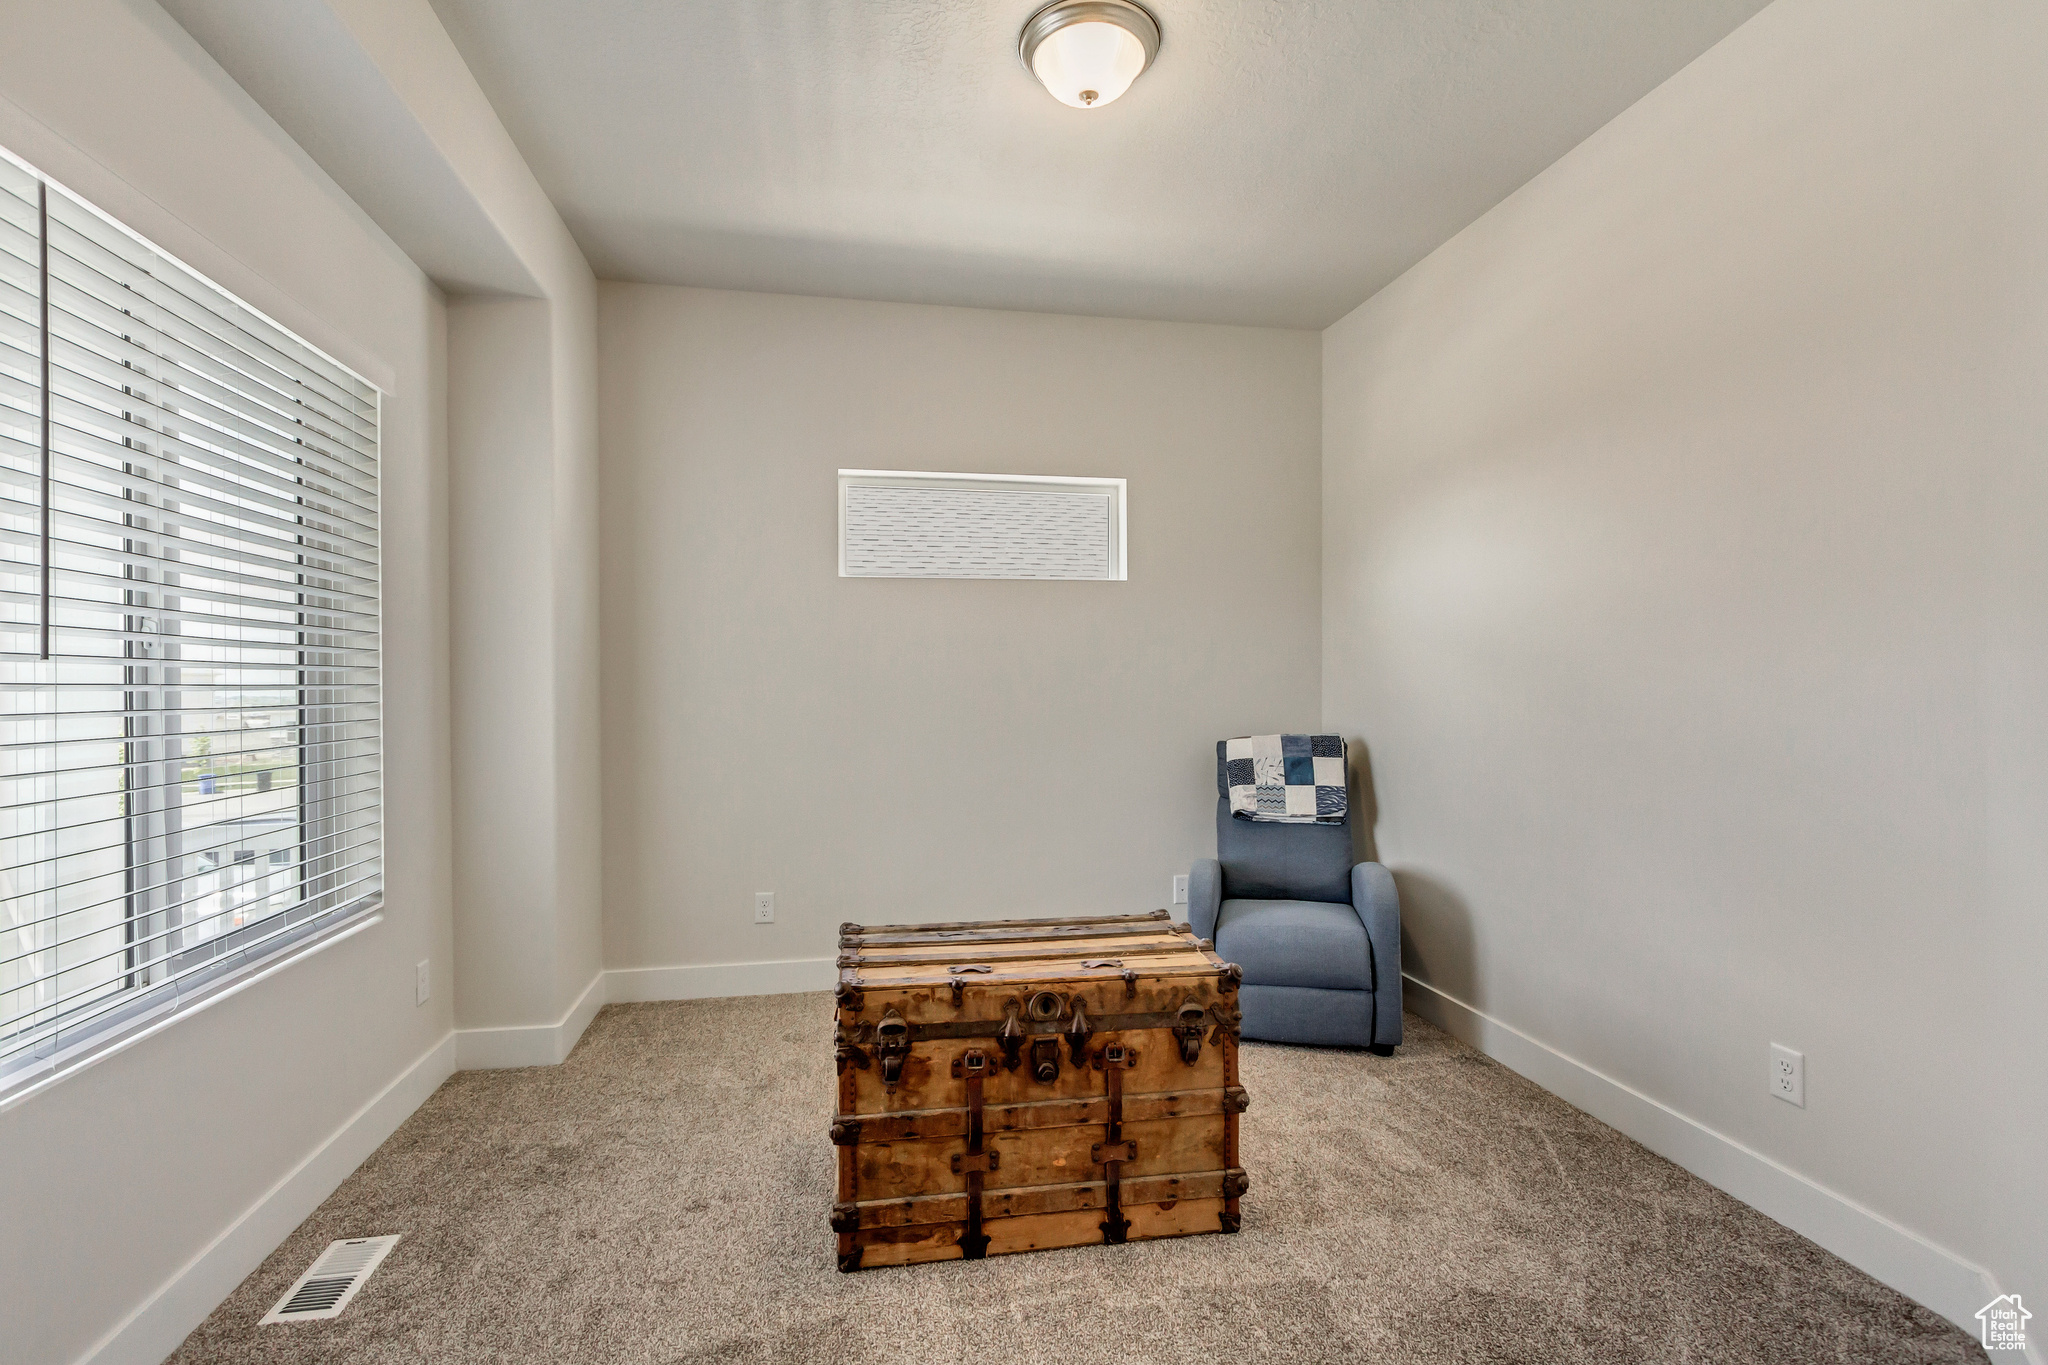 Sitting room/ or office space with light colored carpet